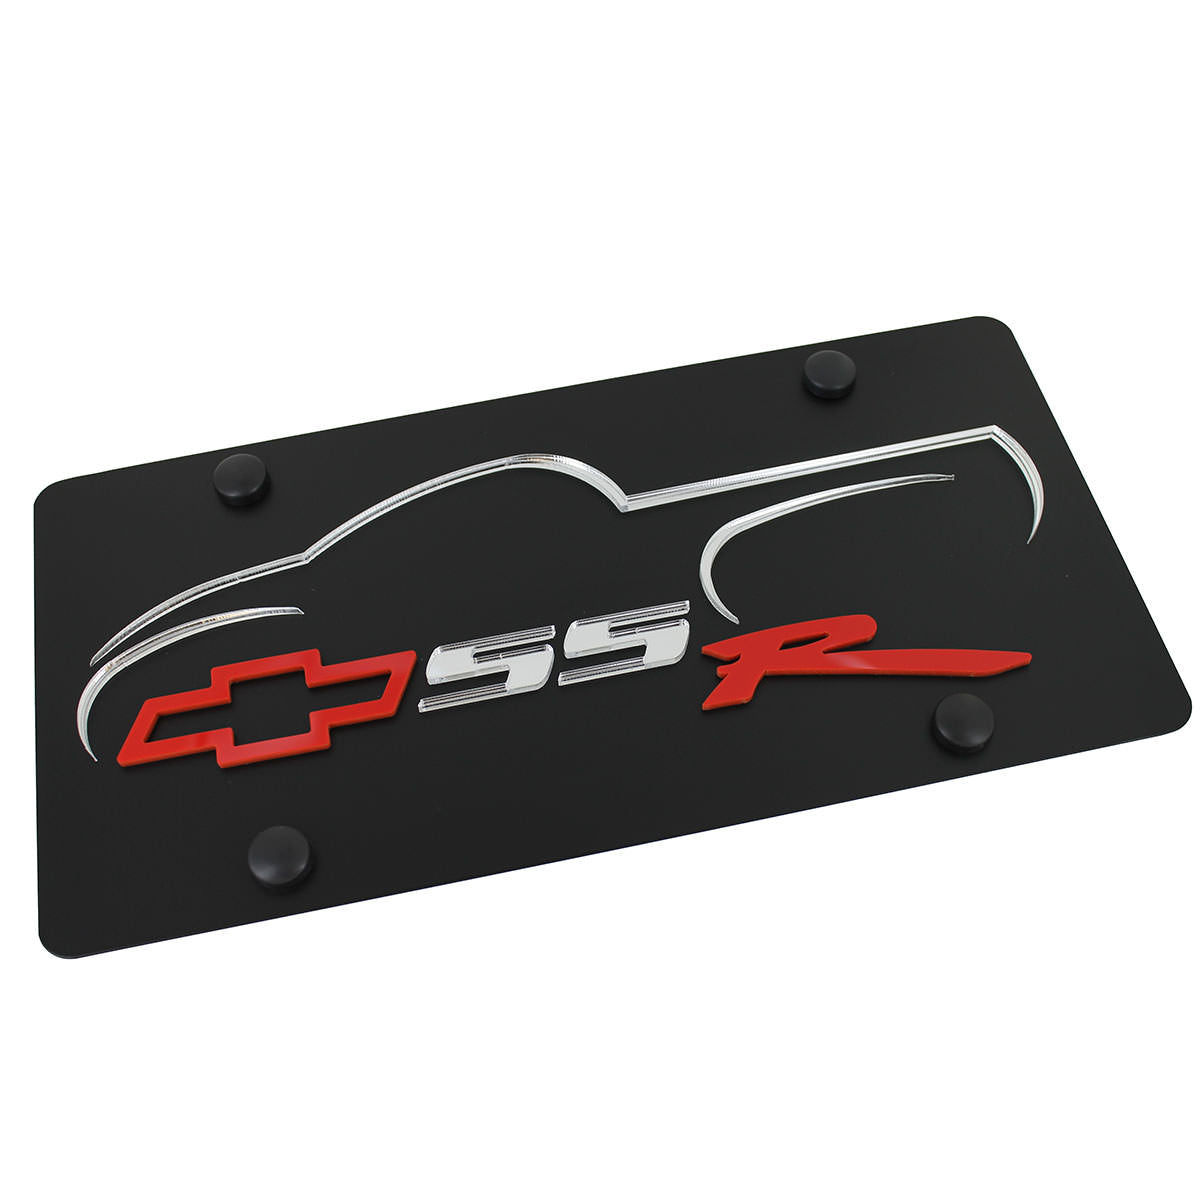 Chevy SS License Plate